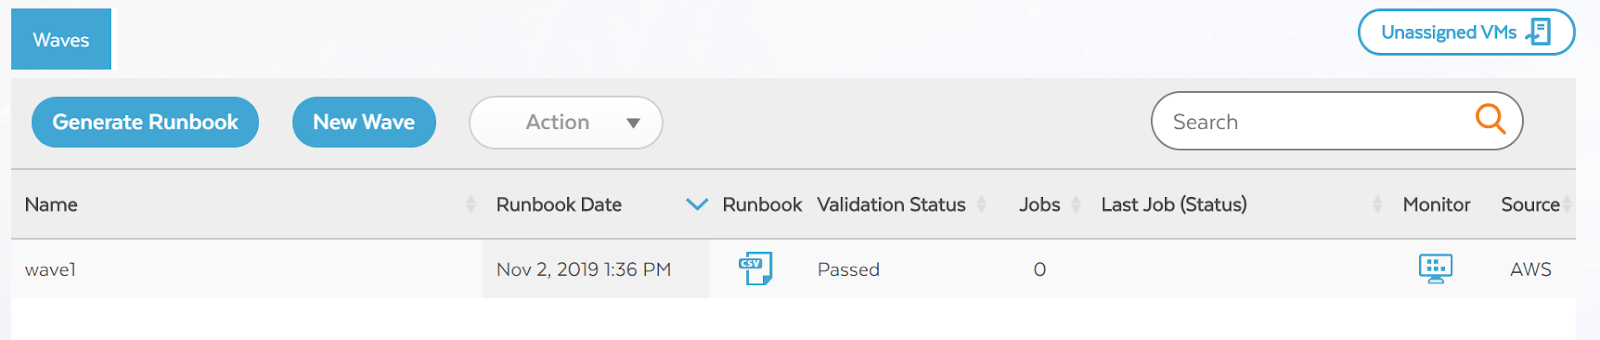 The Runbook Validation Status displays as Passed on the Waves page